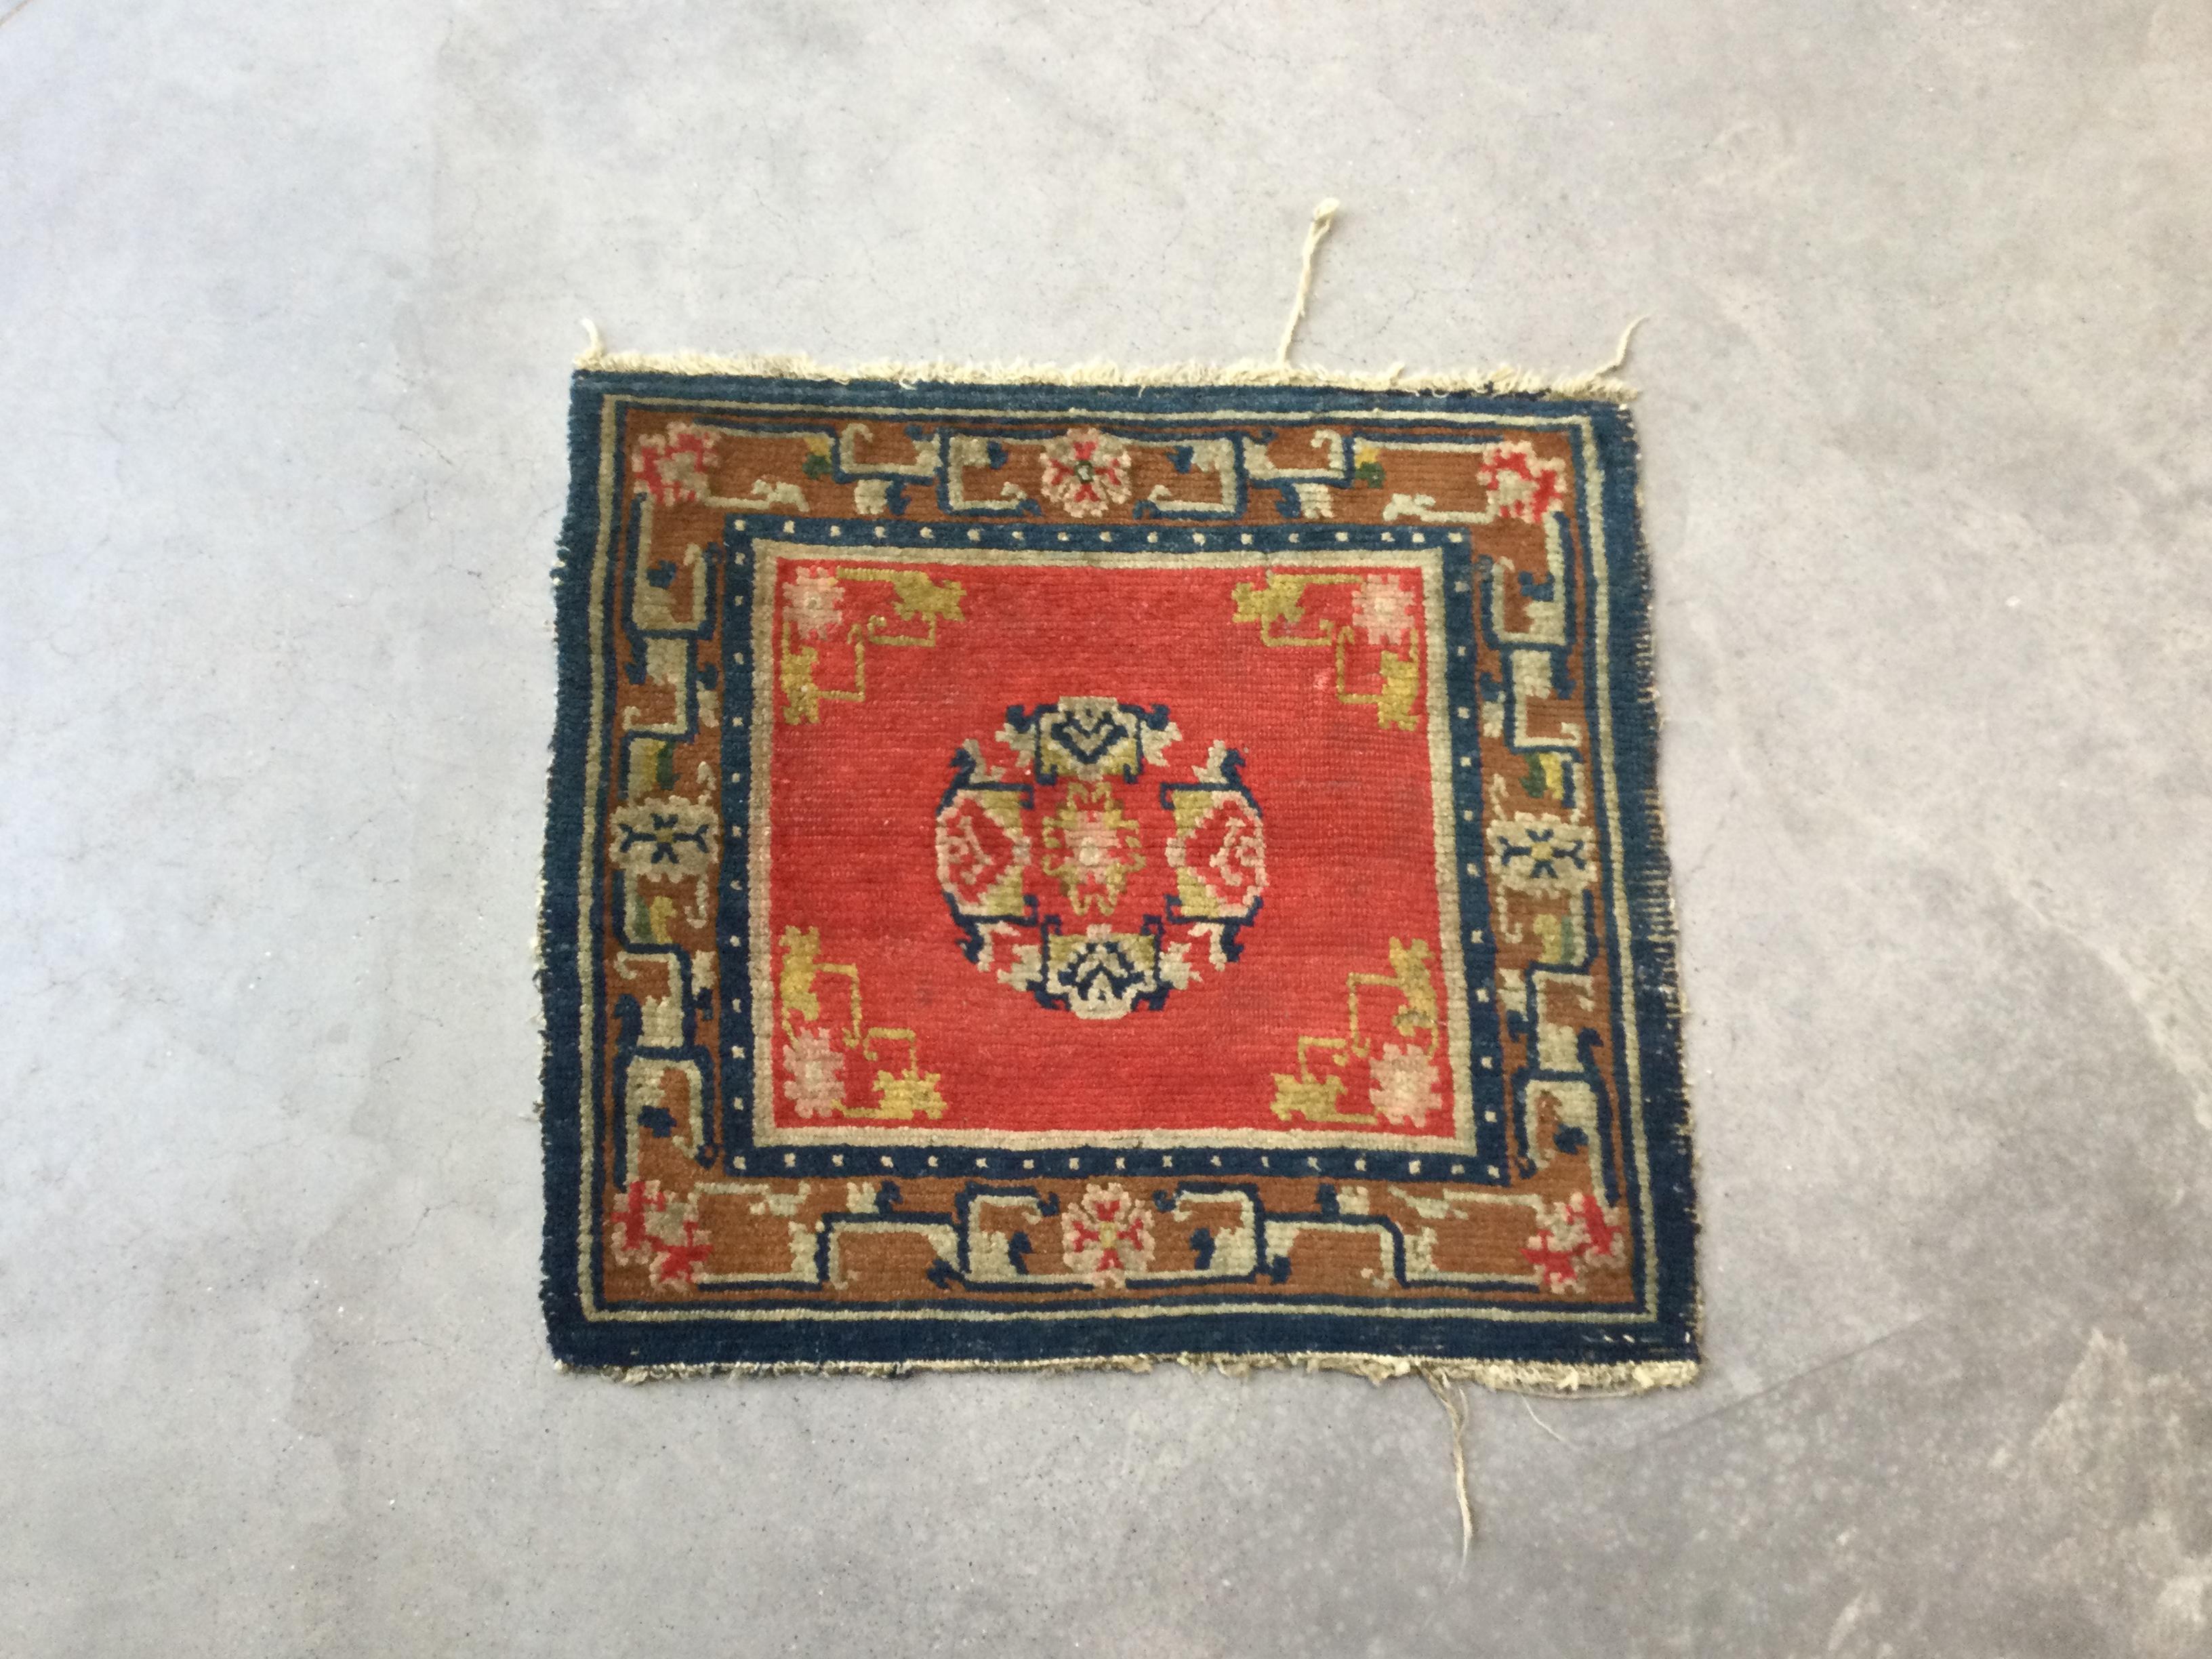 Antique rug of Tibetan origin from around 1930.
- Handmade in wool in the Zigler firm's artisan workshops.
- Wool designs that provide a feeling of constant softness when worn.
- Incorporates the central medallion and all its edges. This makes it